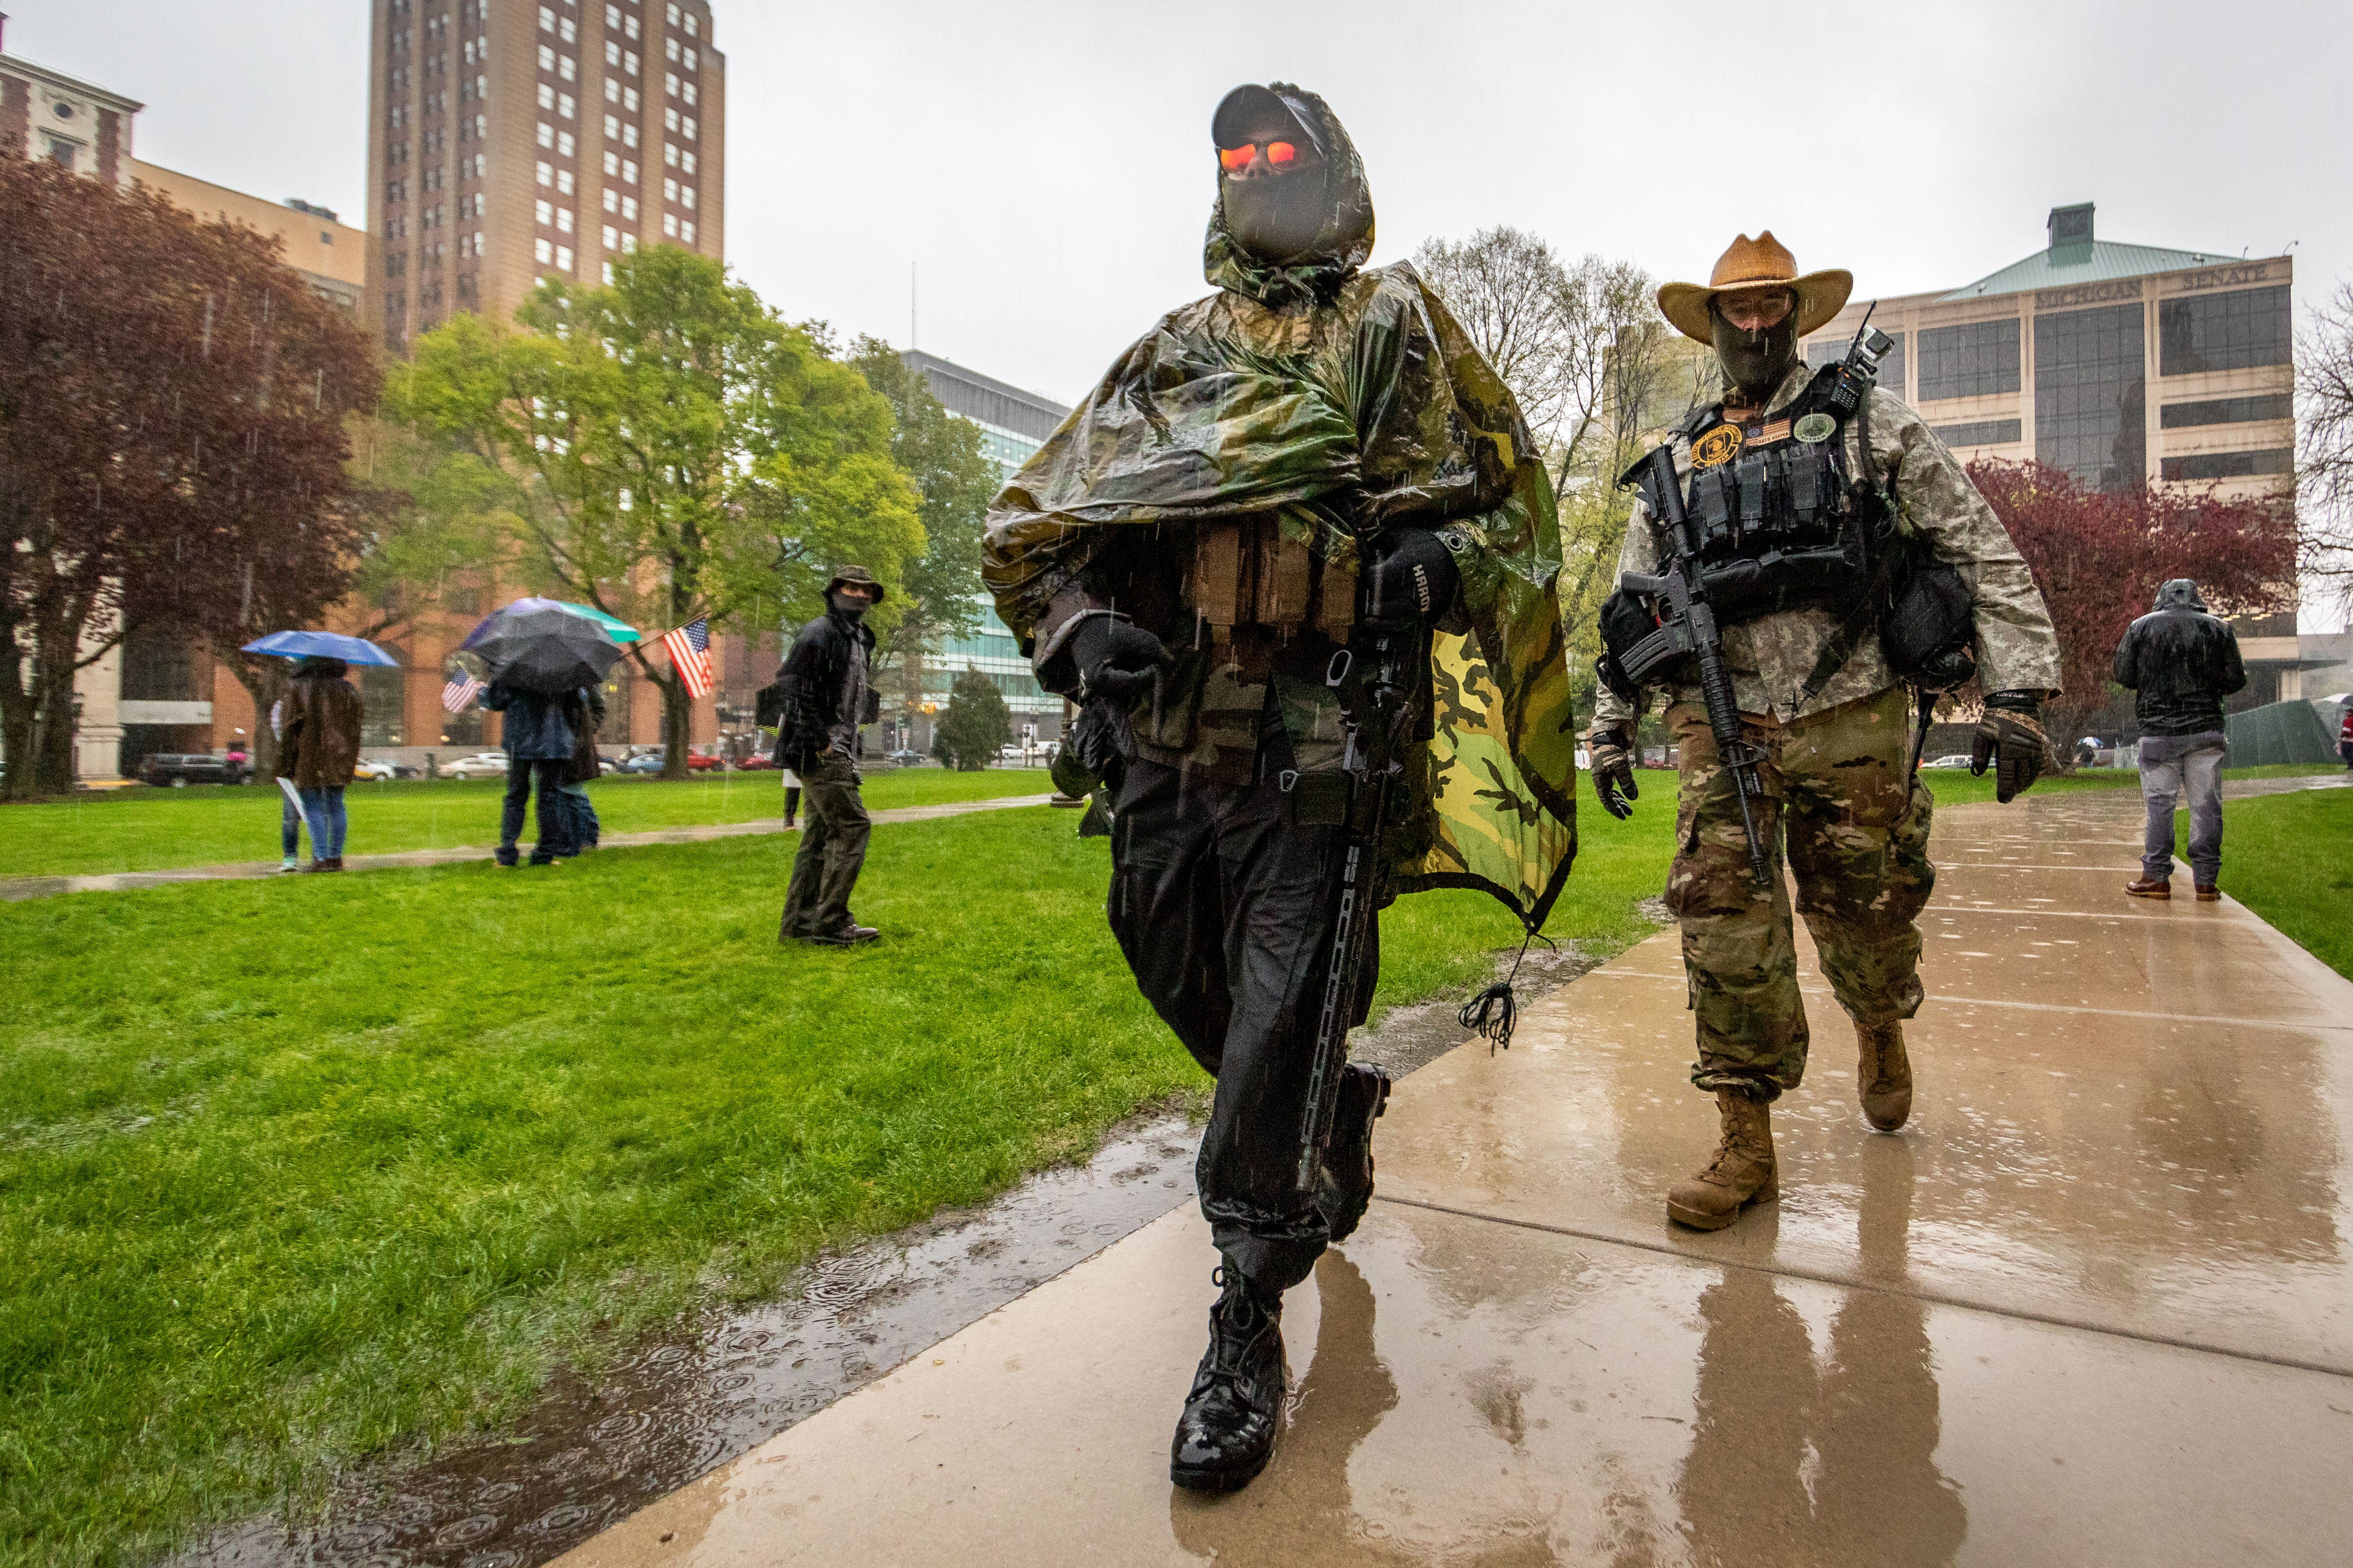 Protesters wearing military fatigues, with weapons strapped across their bodies descend on the Michigan Capitol Thursday to oppose the executive orders Gov.Gretchen Whitmer issued in response to the coronavirus pandemic.